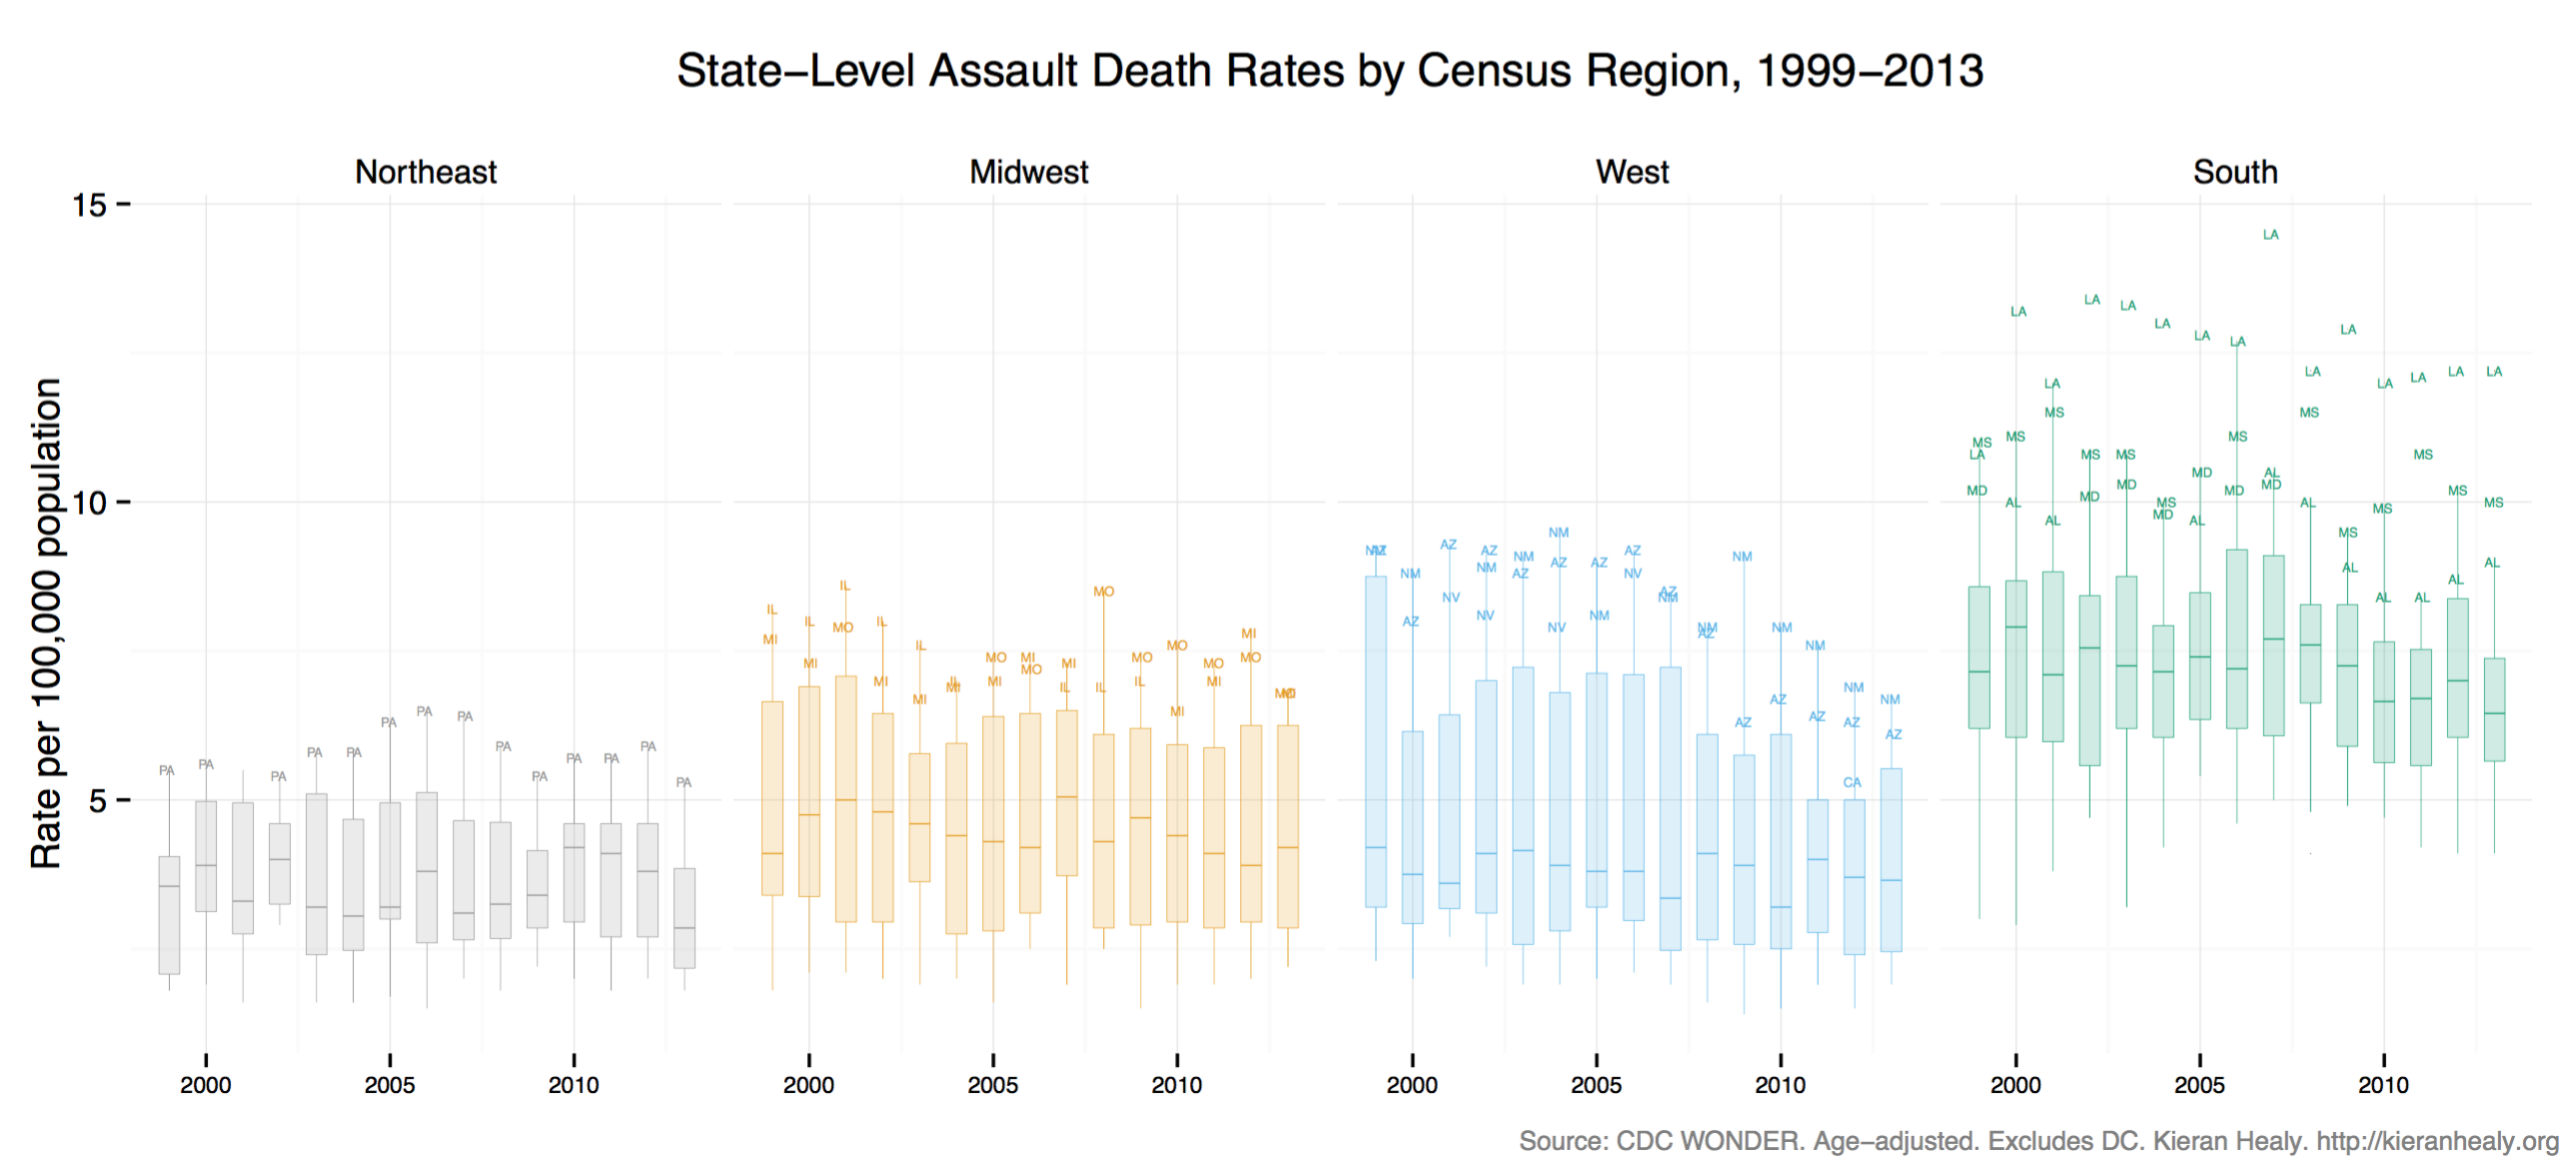 Assault Death rates in US States, by Census Region, 1999-2013.